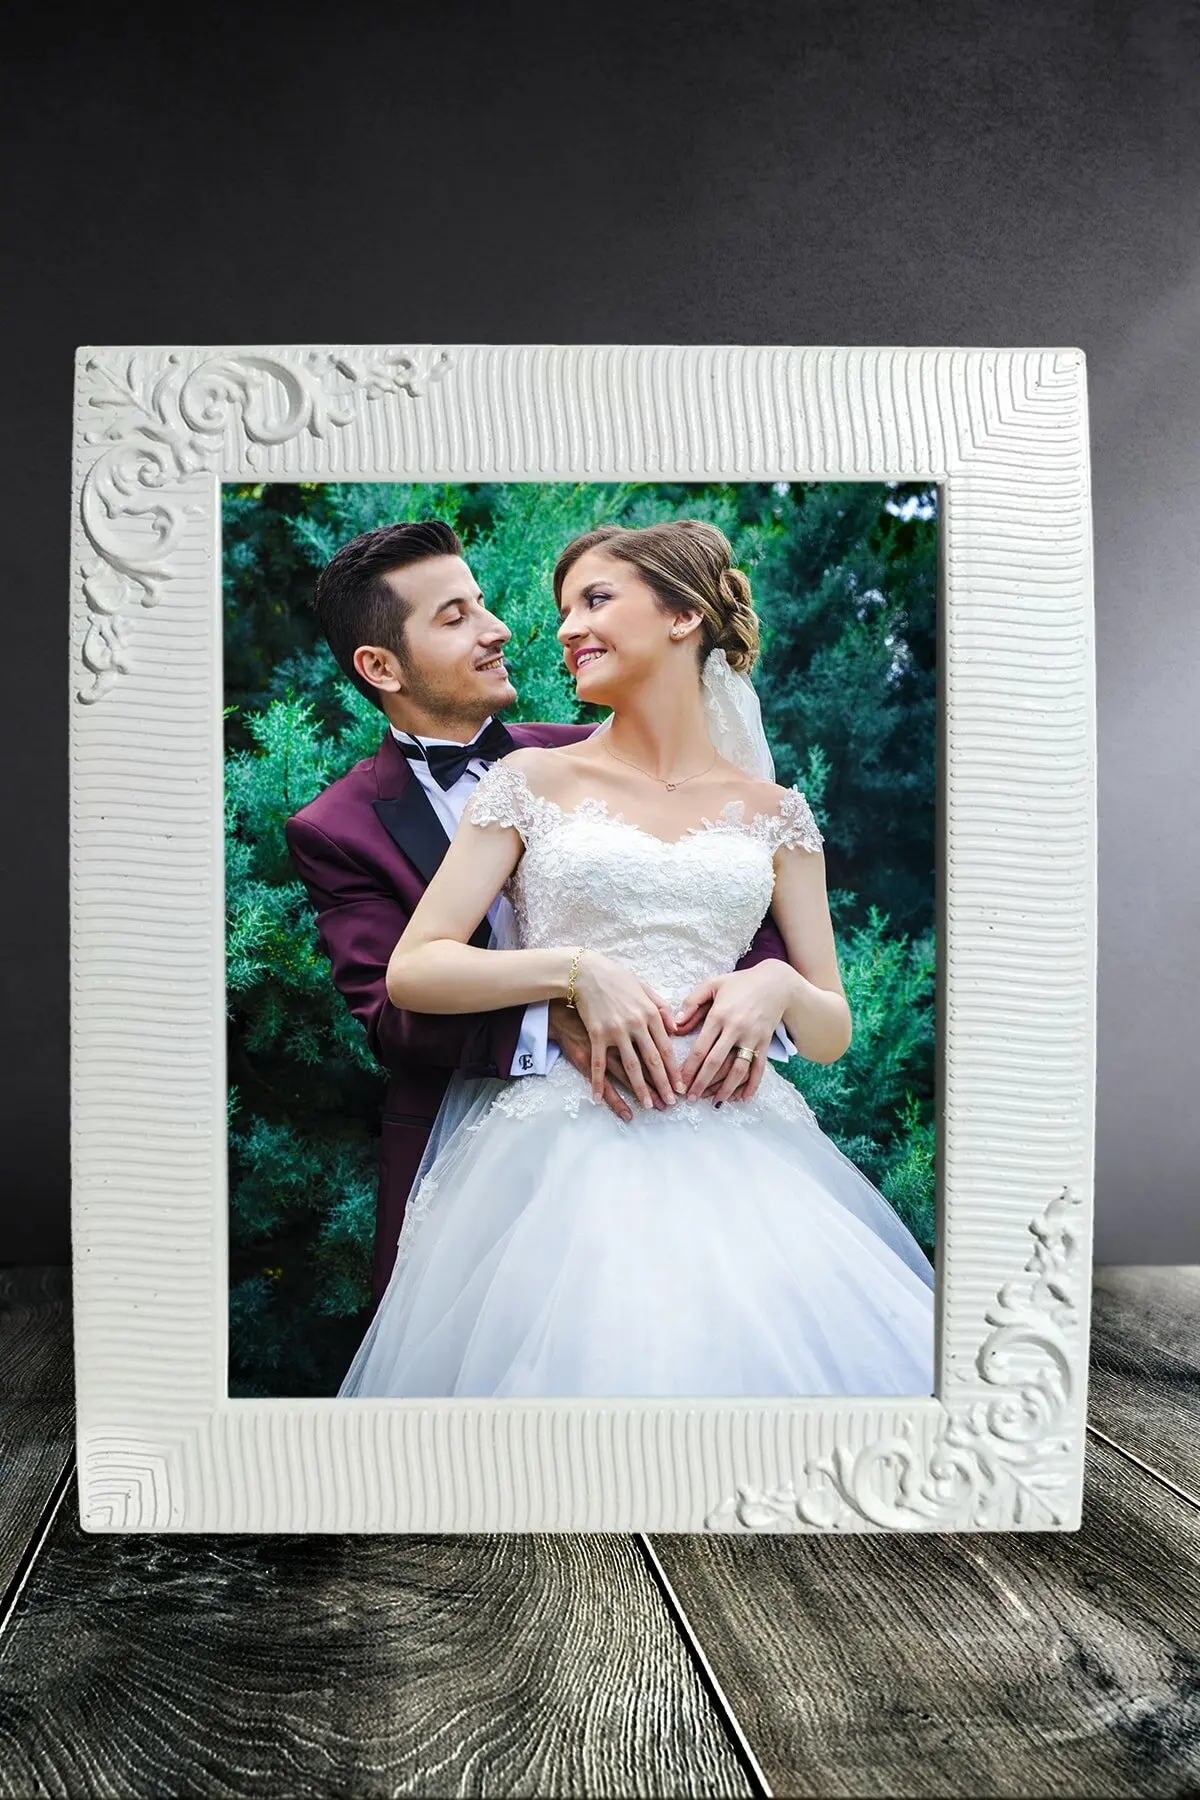 

15x21cm White Embroidered Picture Frame For Photo Paper Horizontal Vertical Decorative Stylish Office Glass House Glazed Crea